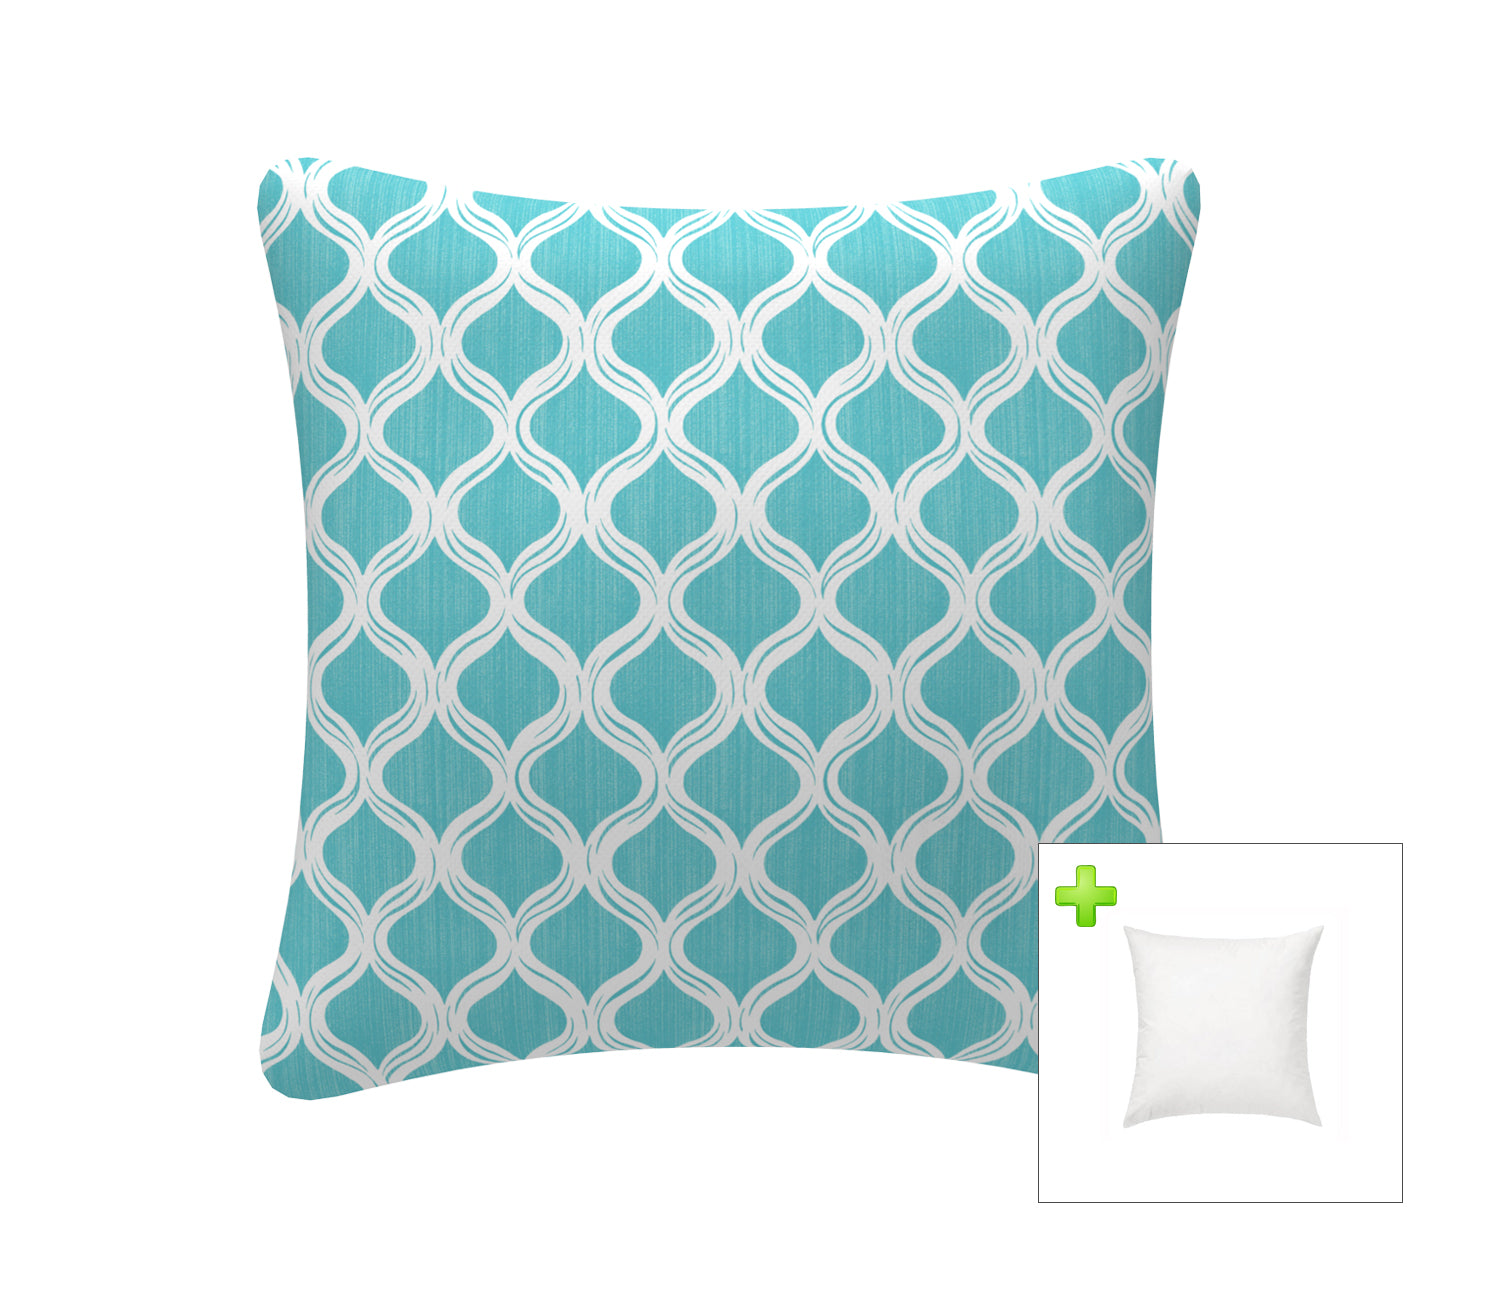 Outdoor Pillows with Insert Blue Geometric Patio Accent Throw Pillows 18x18 inch Square Decorative Pillows